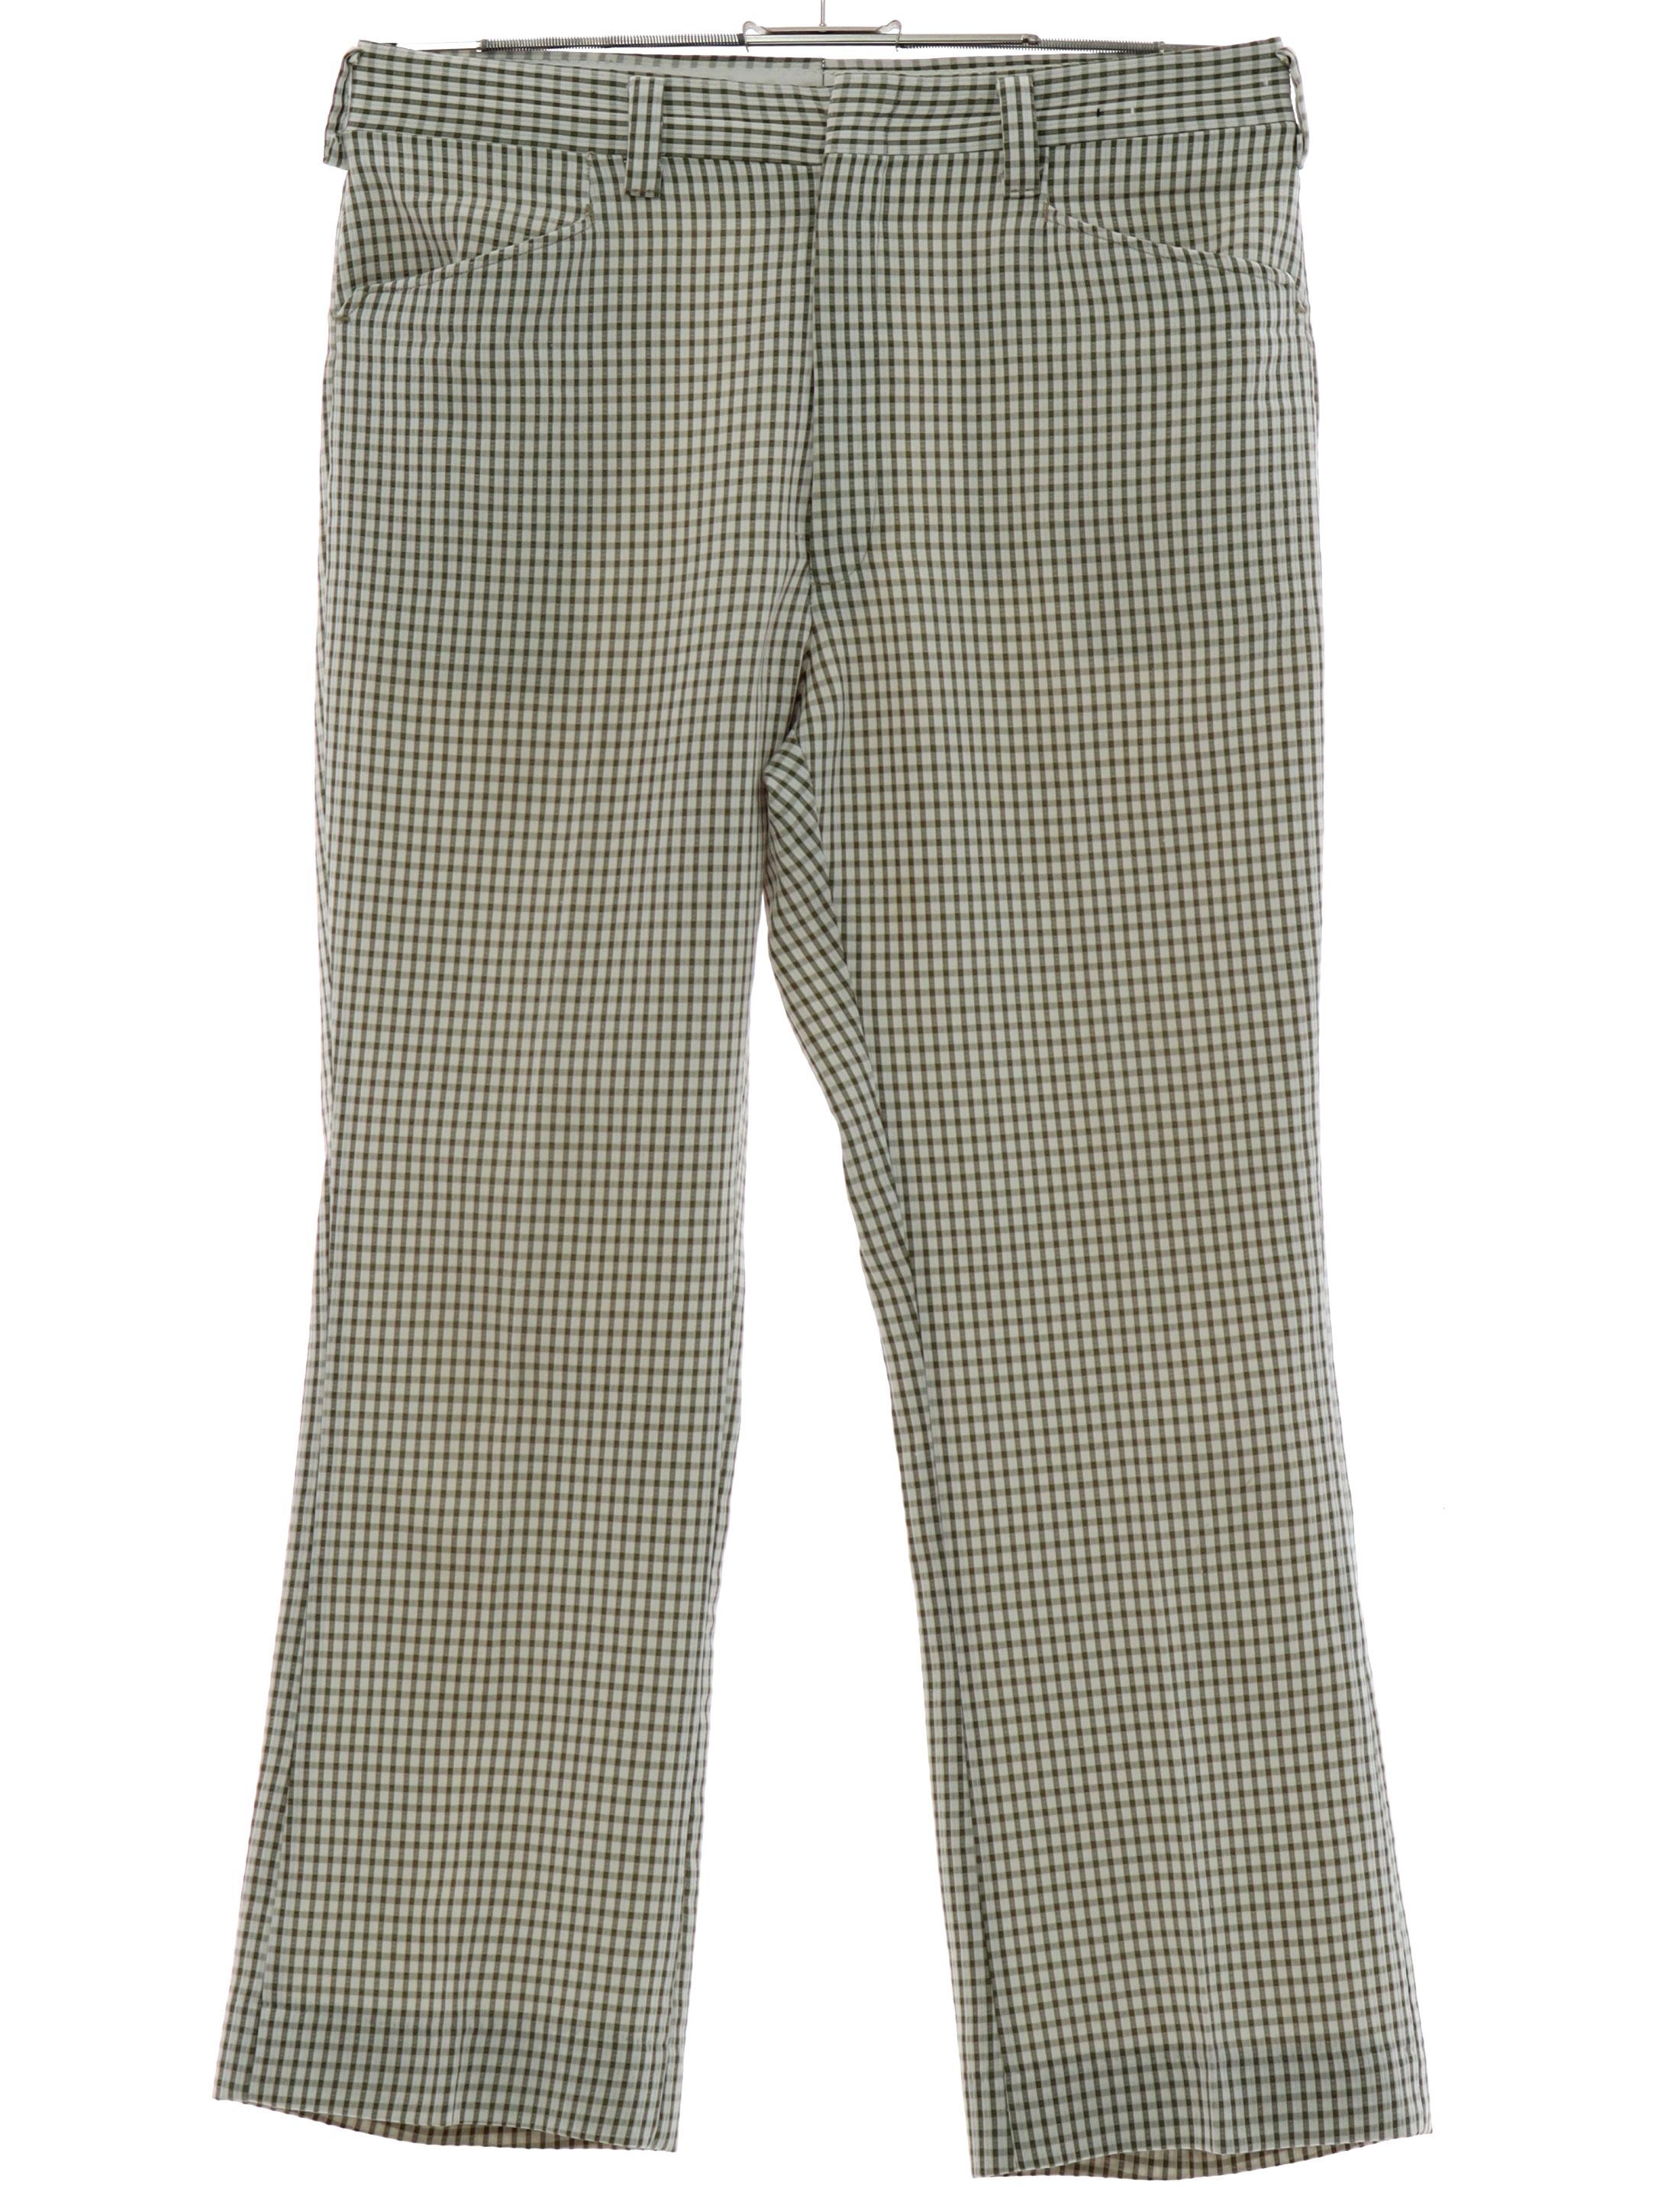 Vintage 1970's Pants: 70s -No Label- Mens ivory and sage green plaid ...